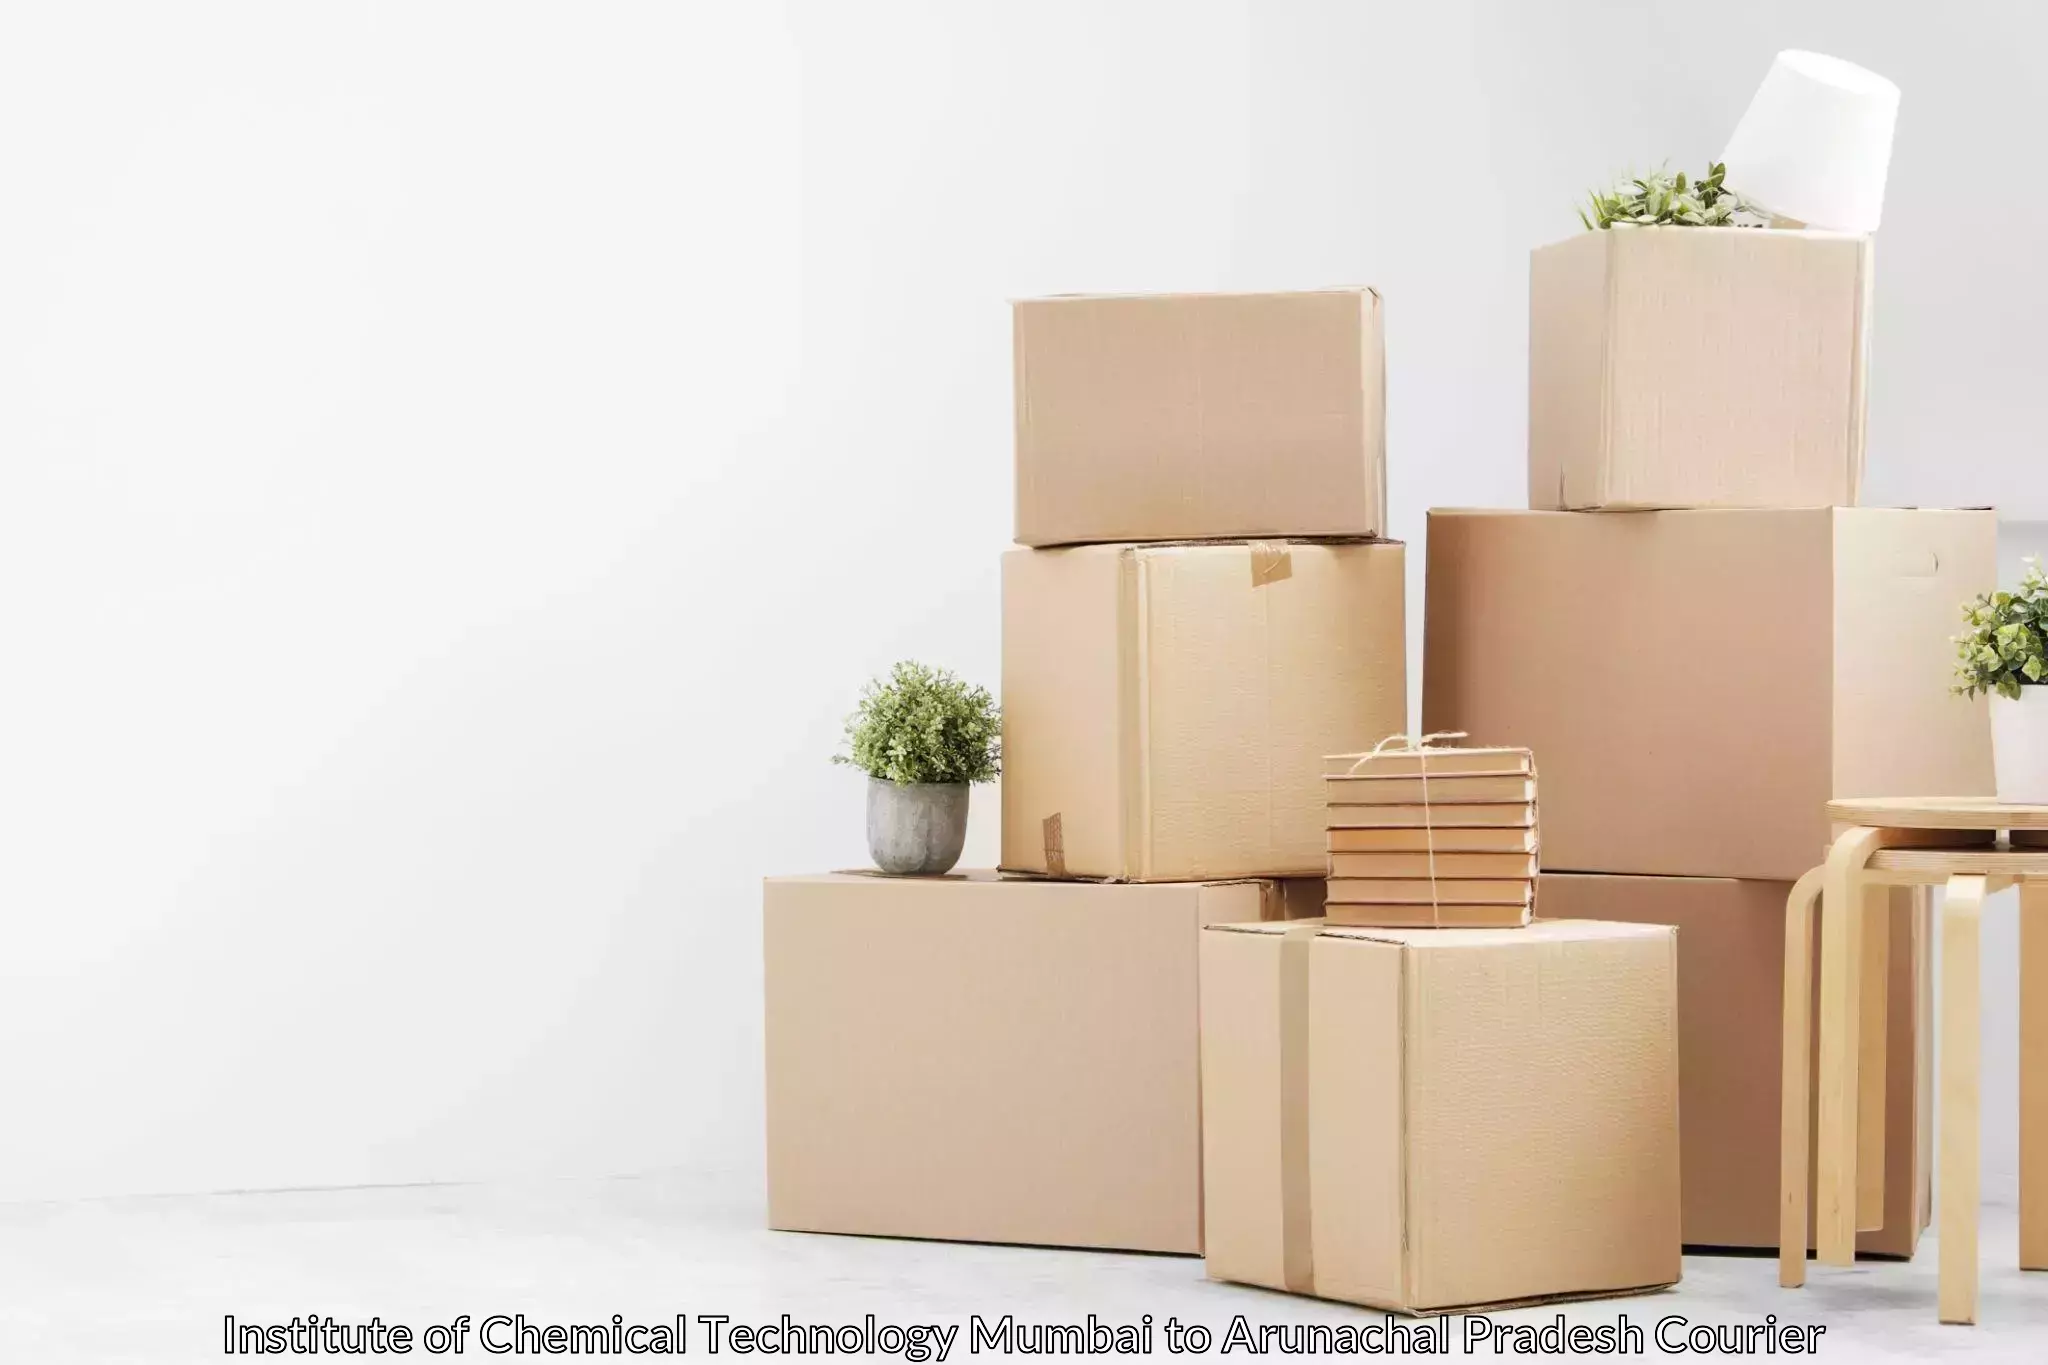 Furniture moving specialists Institute of Chemical Technology Mumbai to Lohit